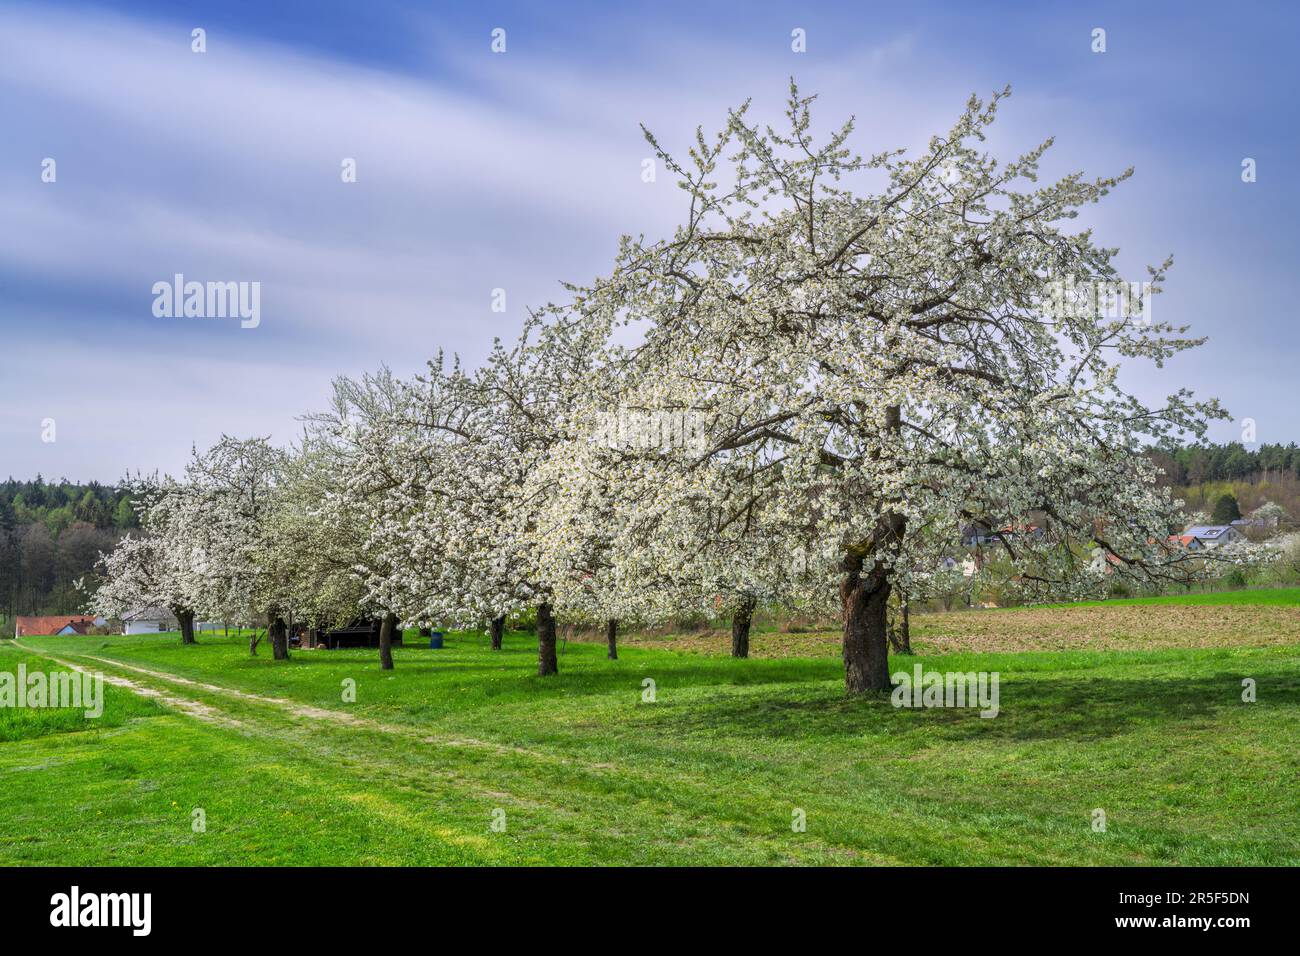 Spring scenic with white  flowering cherry trees Stock Photo